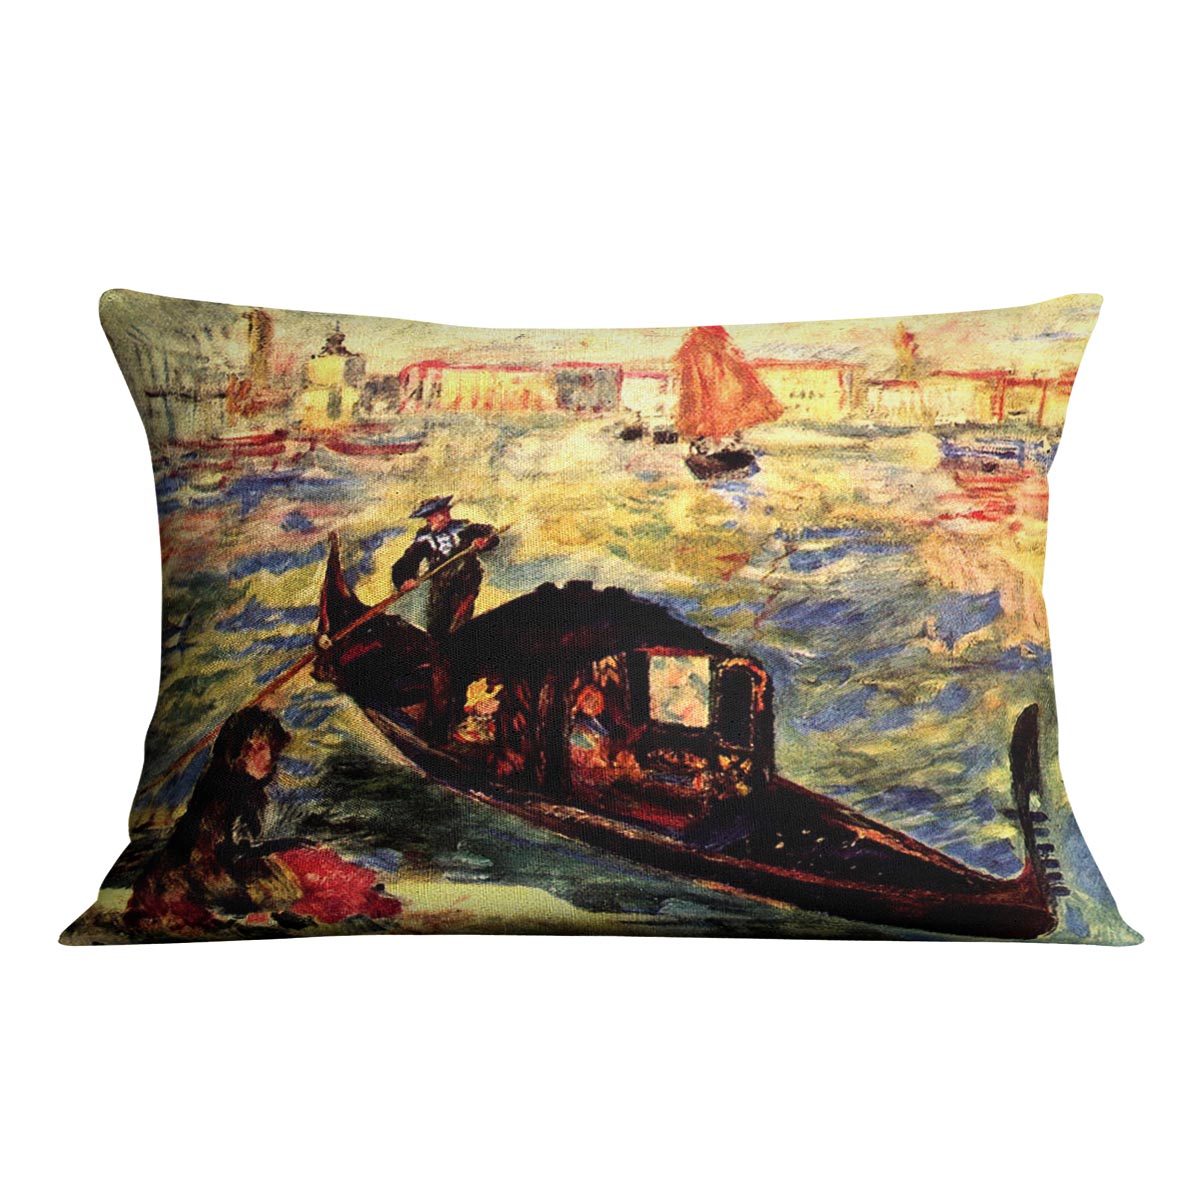 Gondola on the Canale Grande by Renoir Cushion